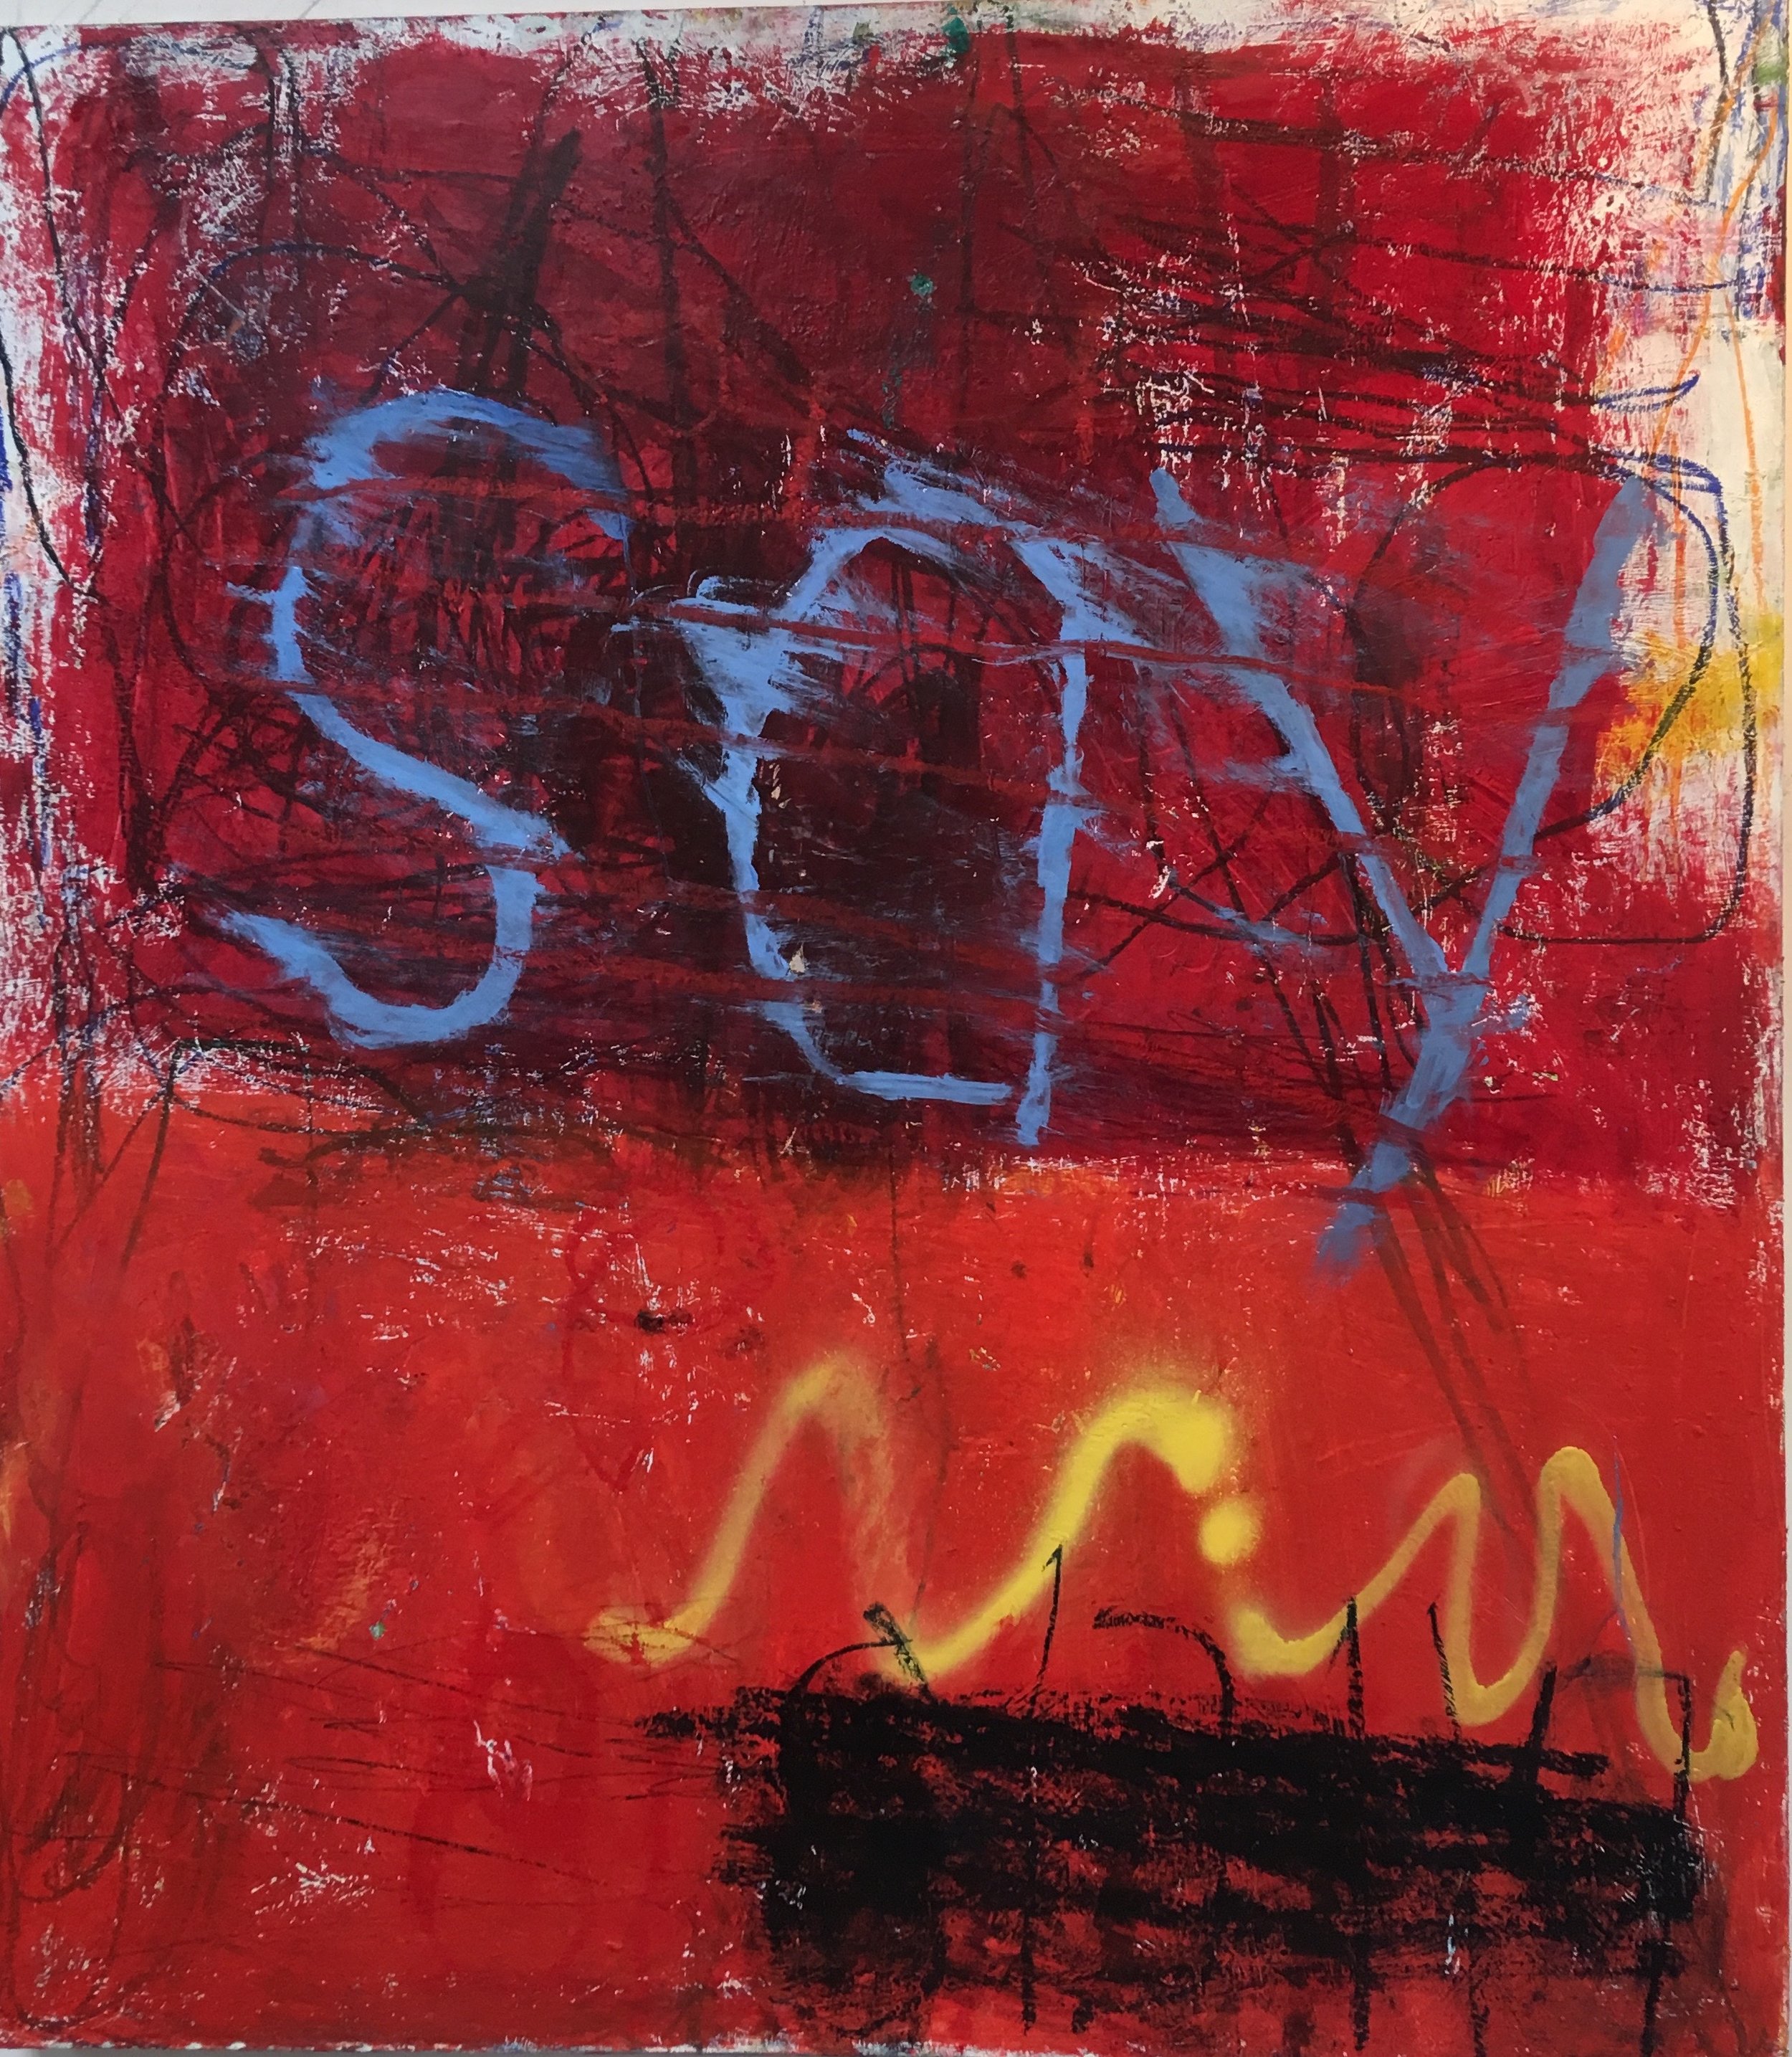 SOLD say 52x48in oil, spray on canvas 2019